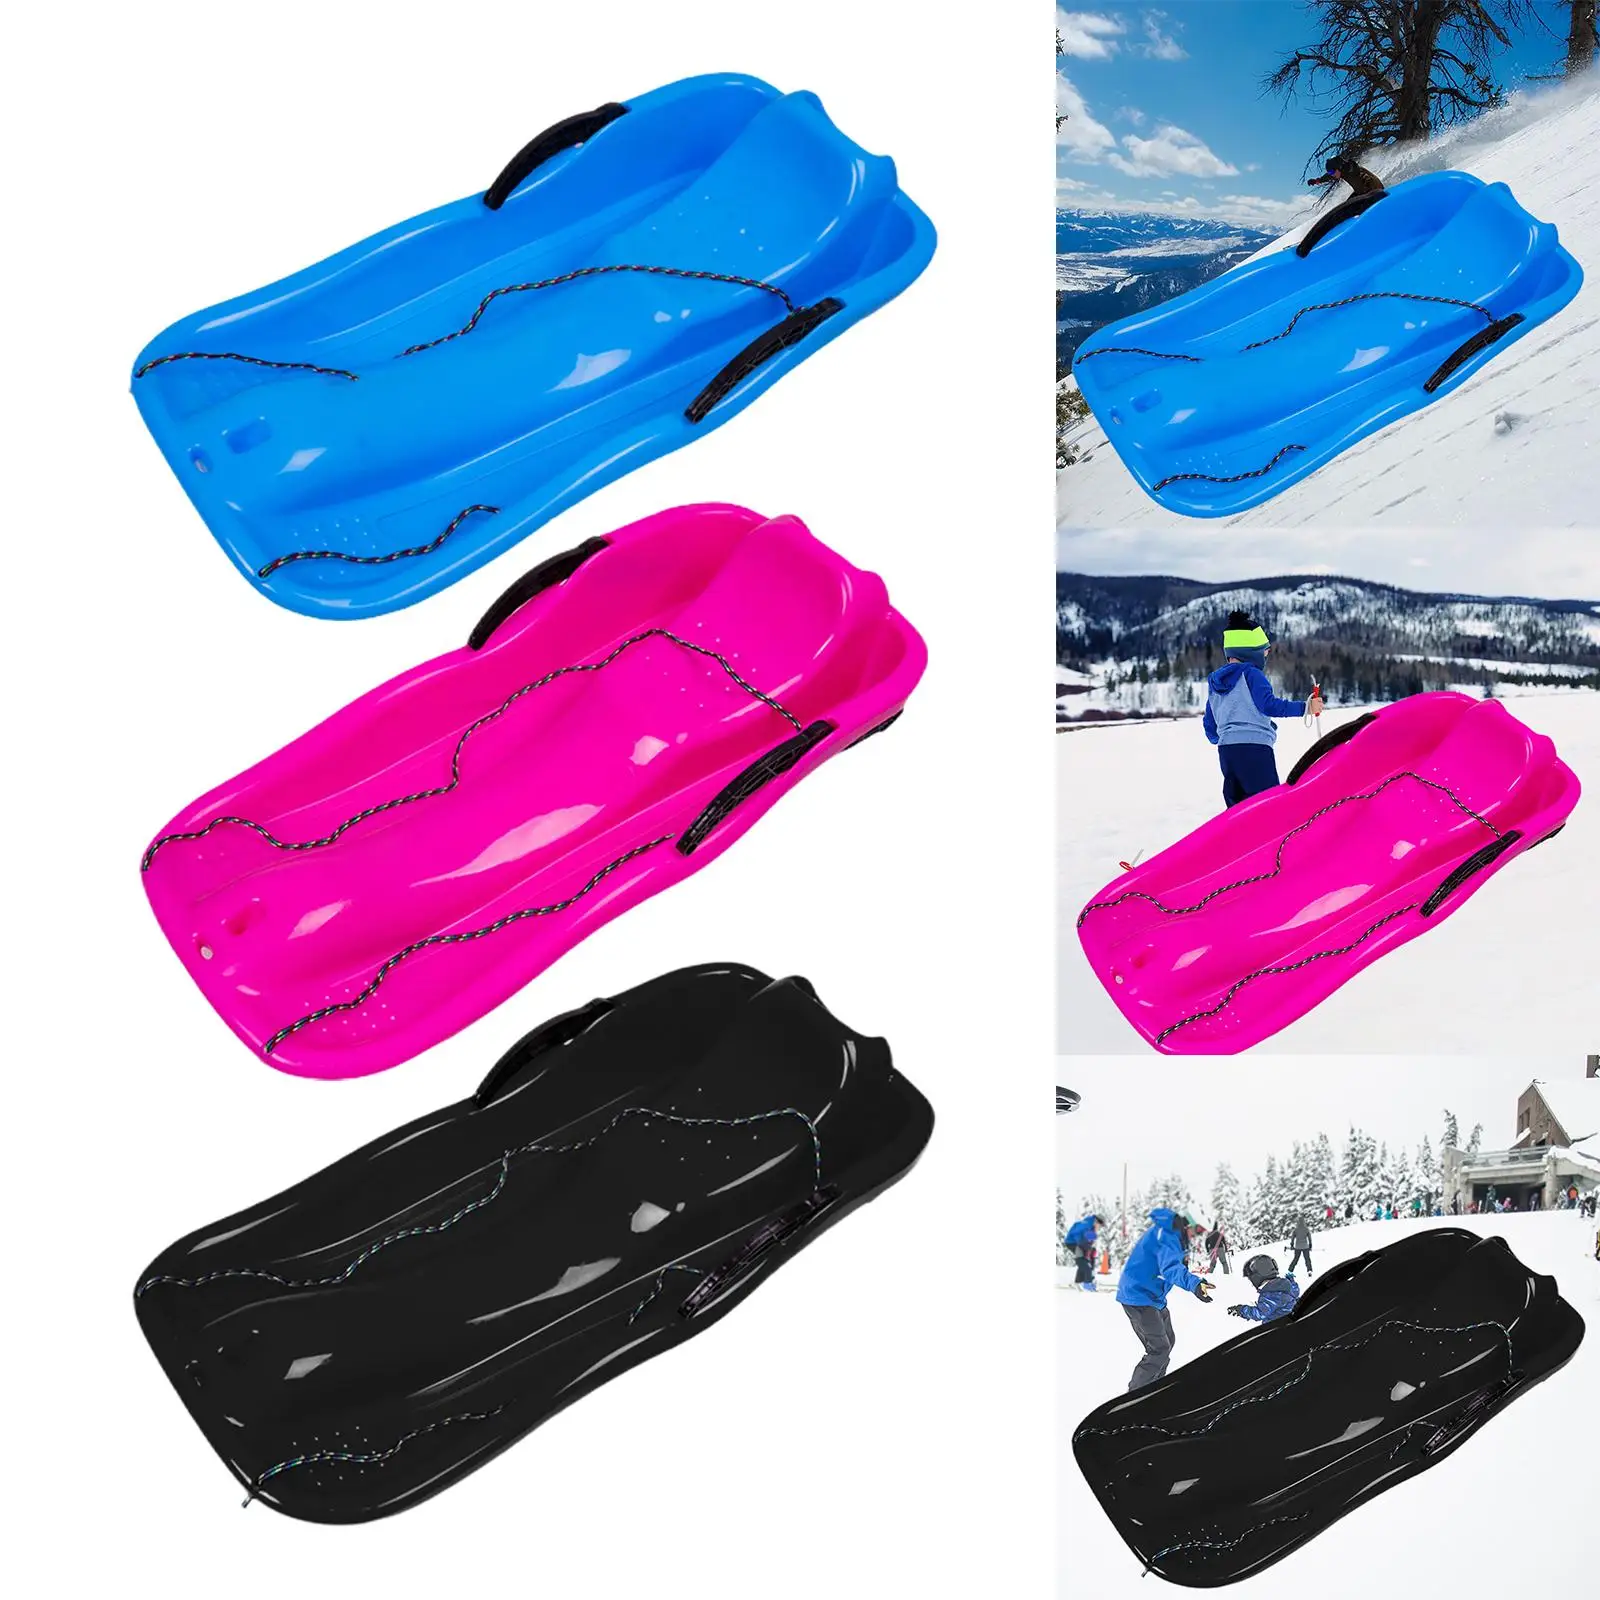 Portable Winter Snow Sled Kids Sledge Sledding Double Human Sleigh with Double Seat with Pull Rope Toboggan for Skiing Lawn Yard